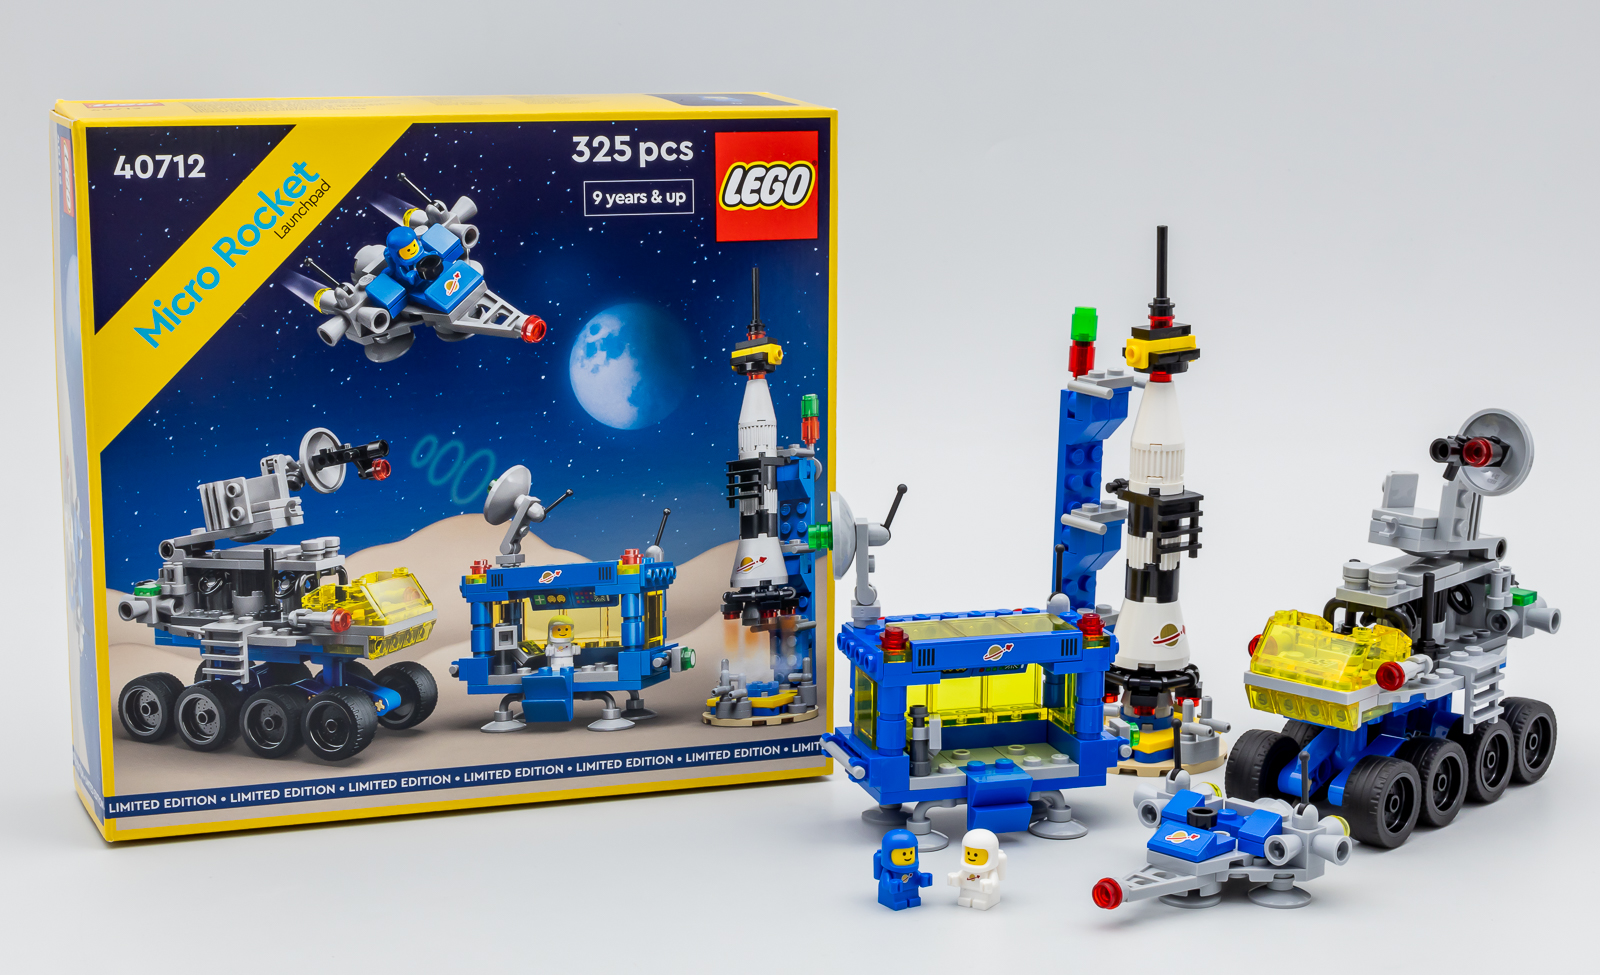 ▻ On the LEGO Shop: the LEGO 40712 Micro Rocket Launchpad set is